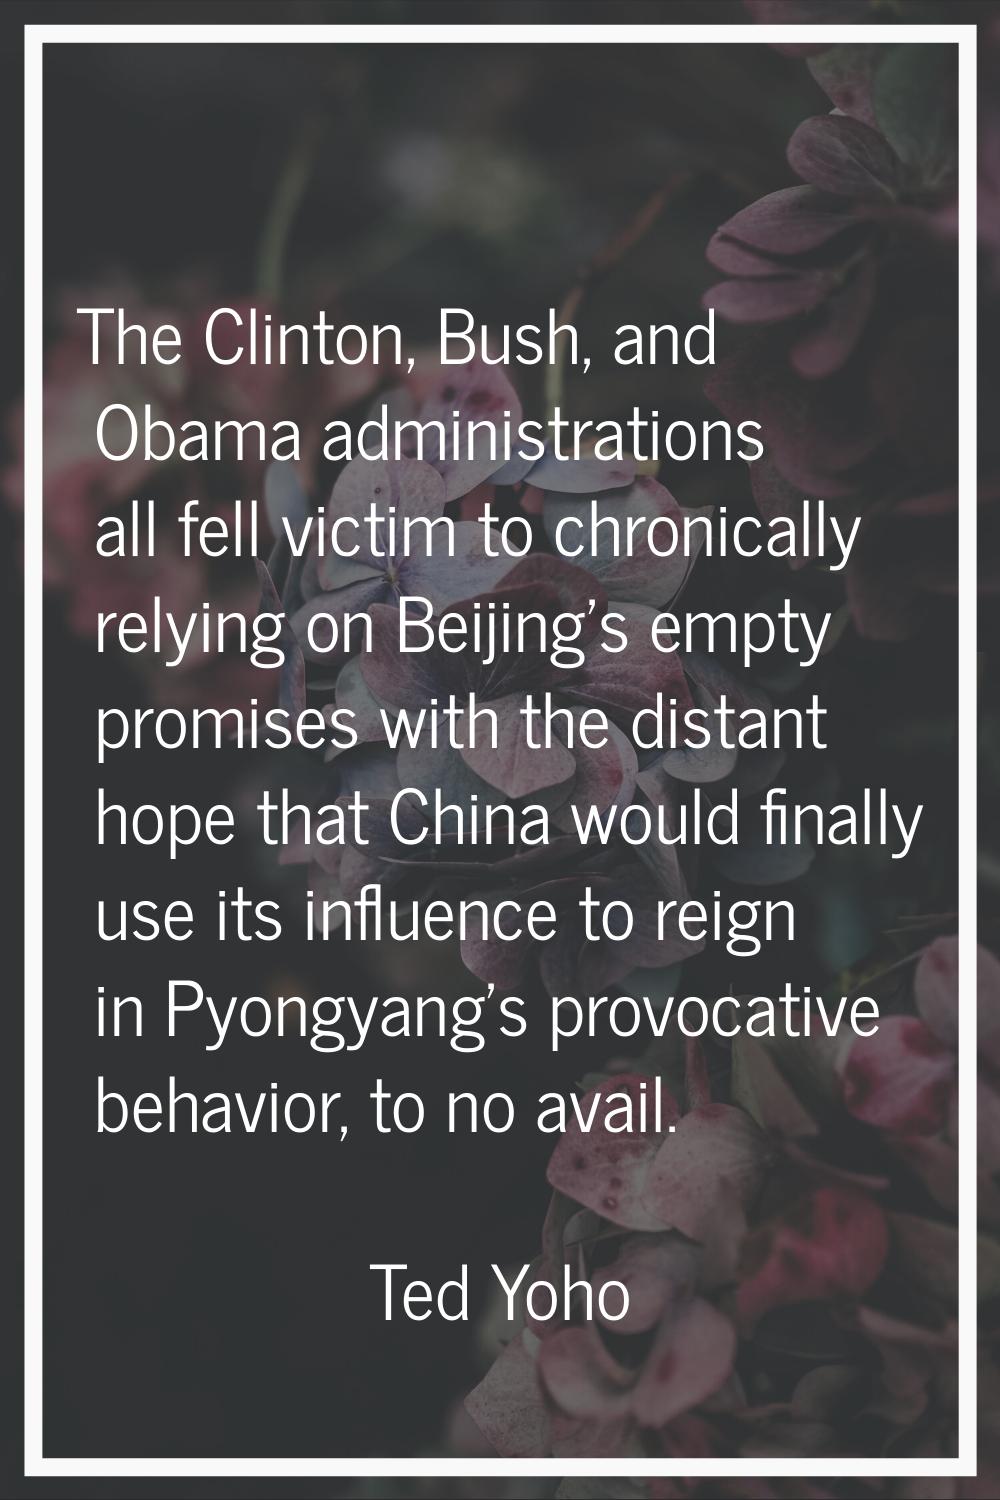 The Clinton, Bush, and Obama administrations all fell victim to chronically relying on Beijing's em